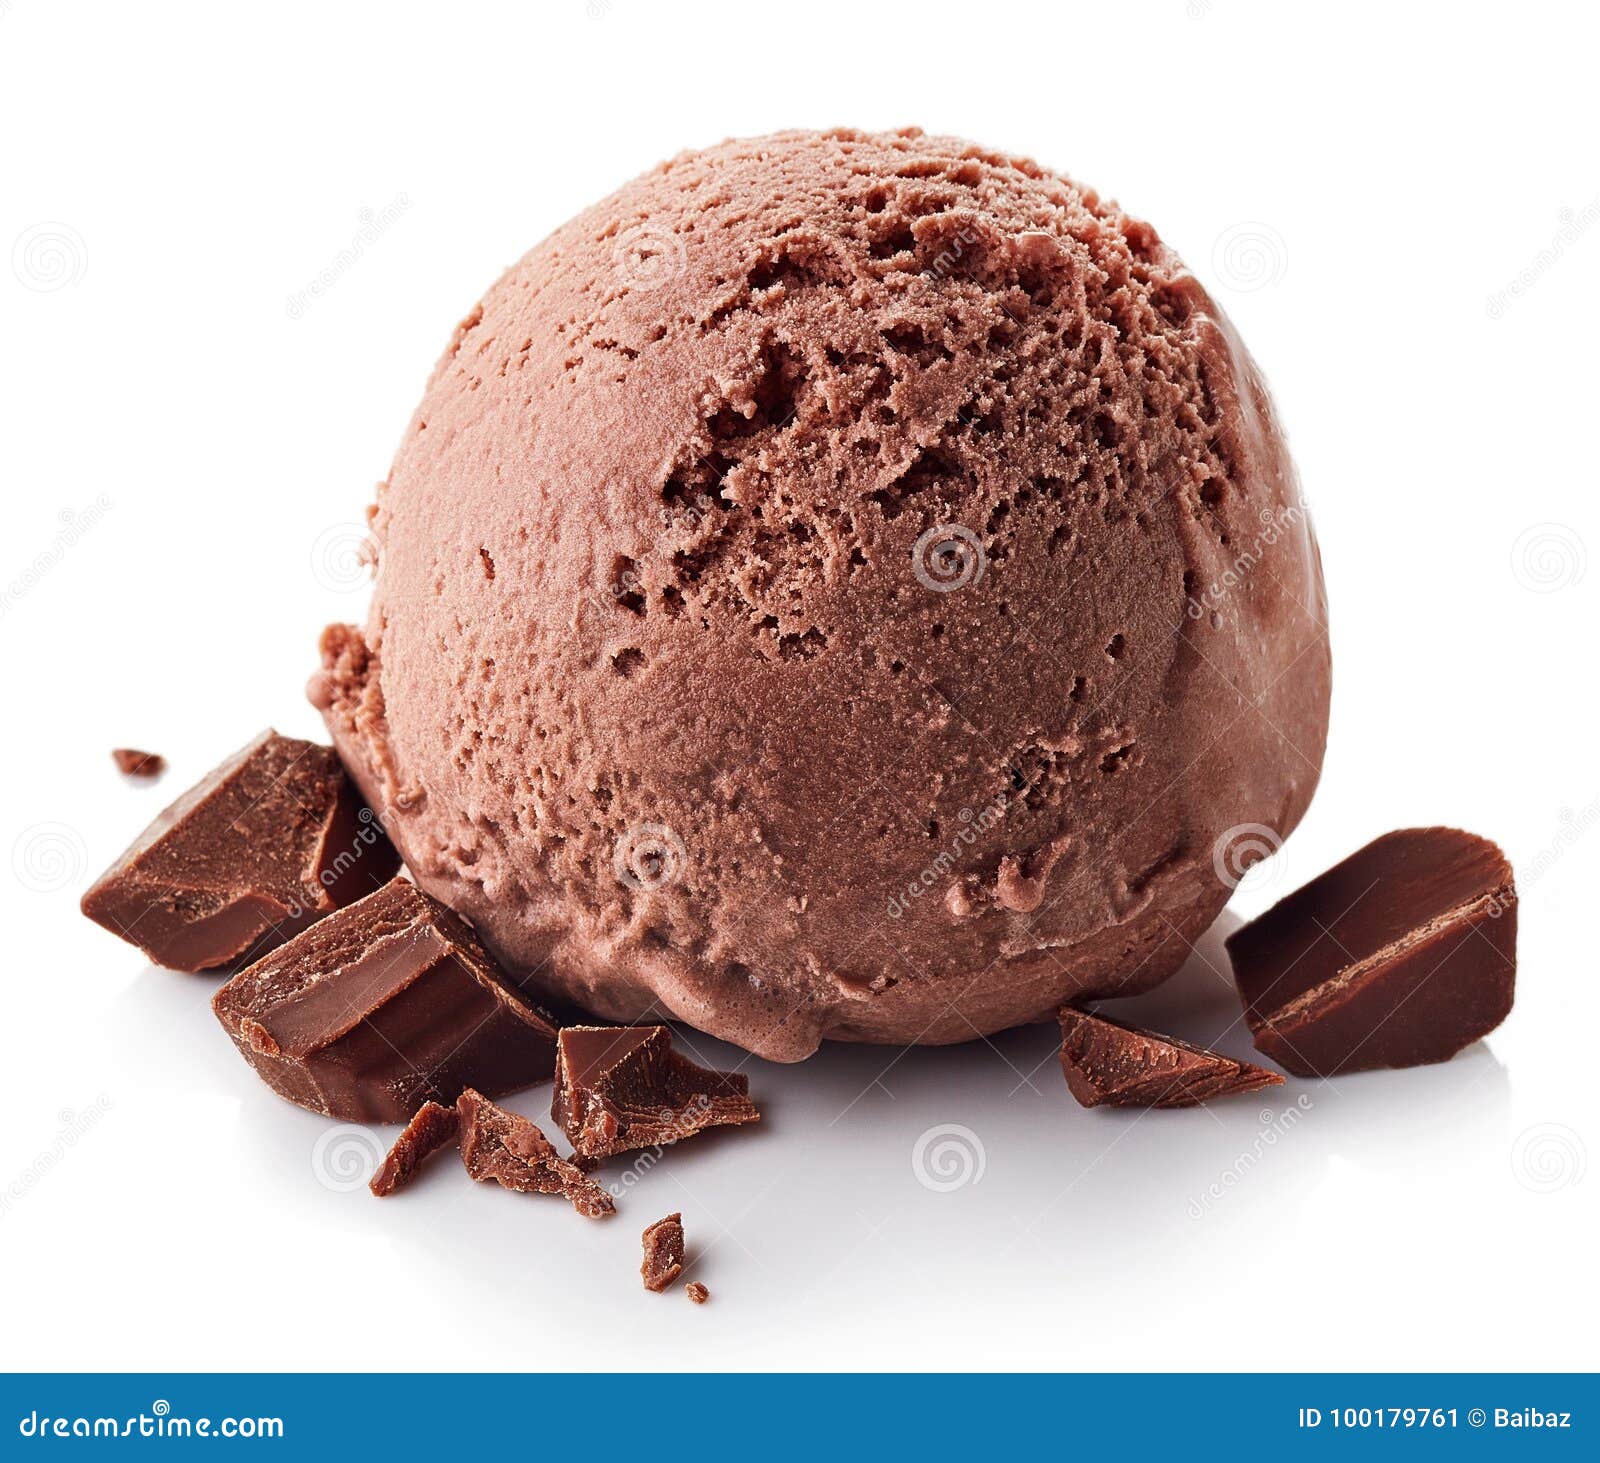 https://thumbs.dreamstime.com/z/chocolate-ice-cream-ball-one-brown-chocolate-ice-cream-ball-isolated-white-background-100179761.jpg